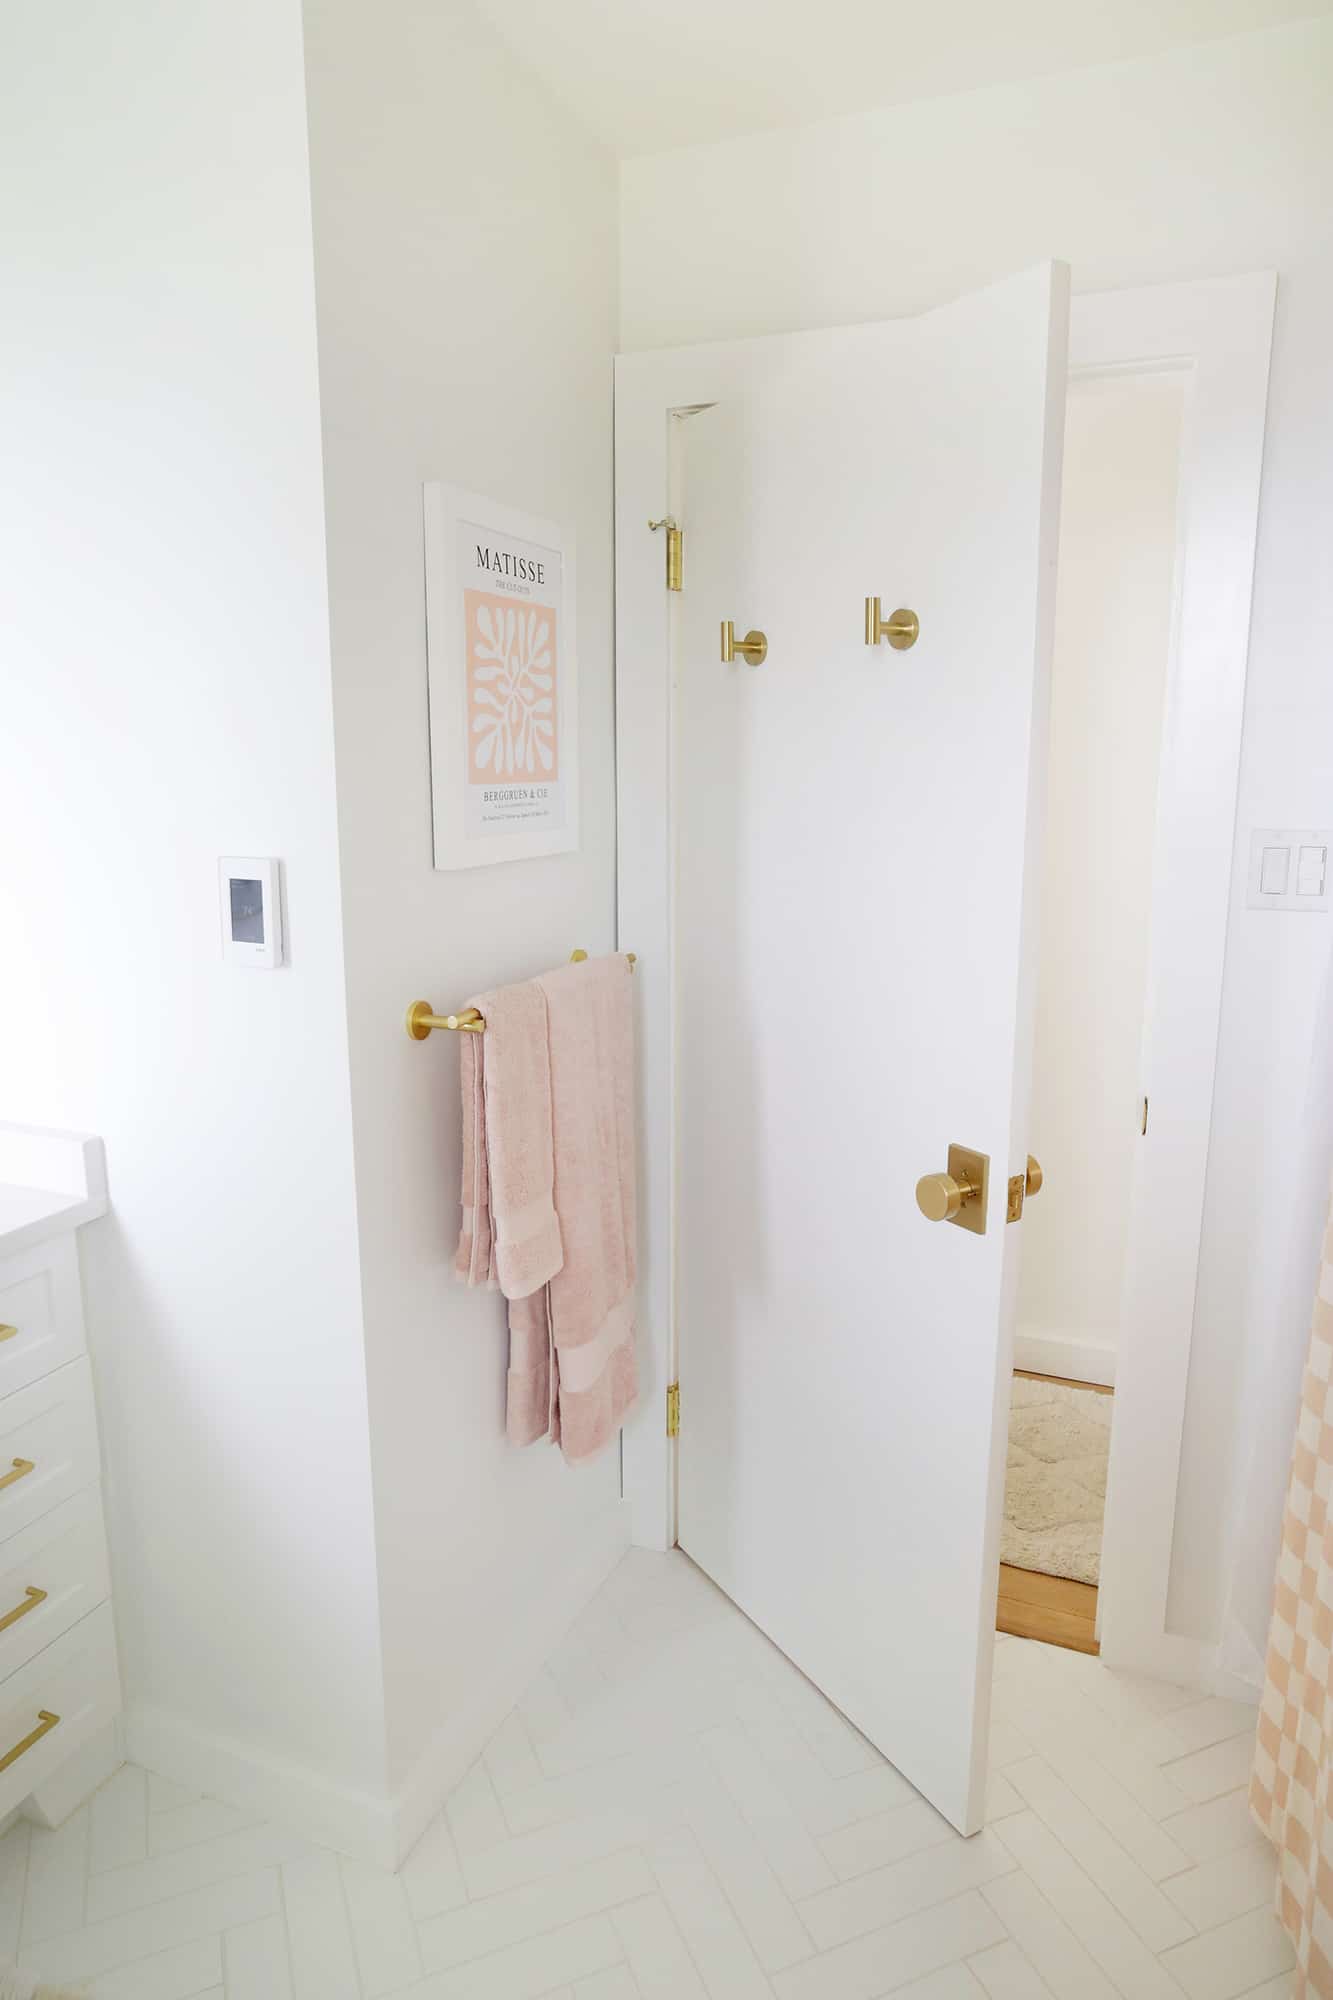 towel rack with pink towels and matisse print above it